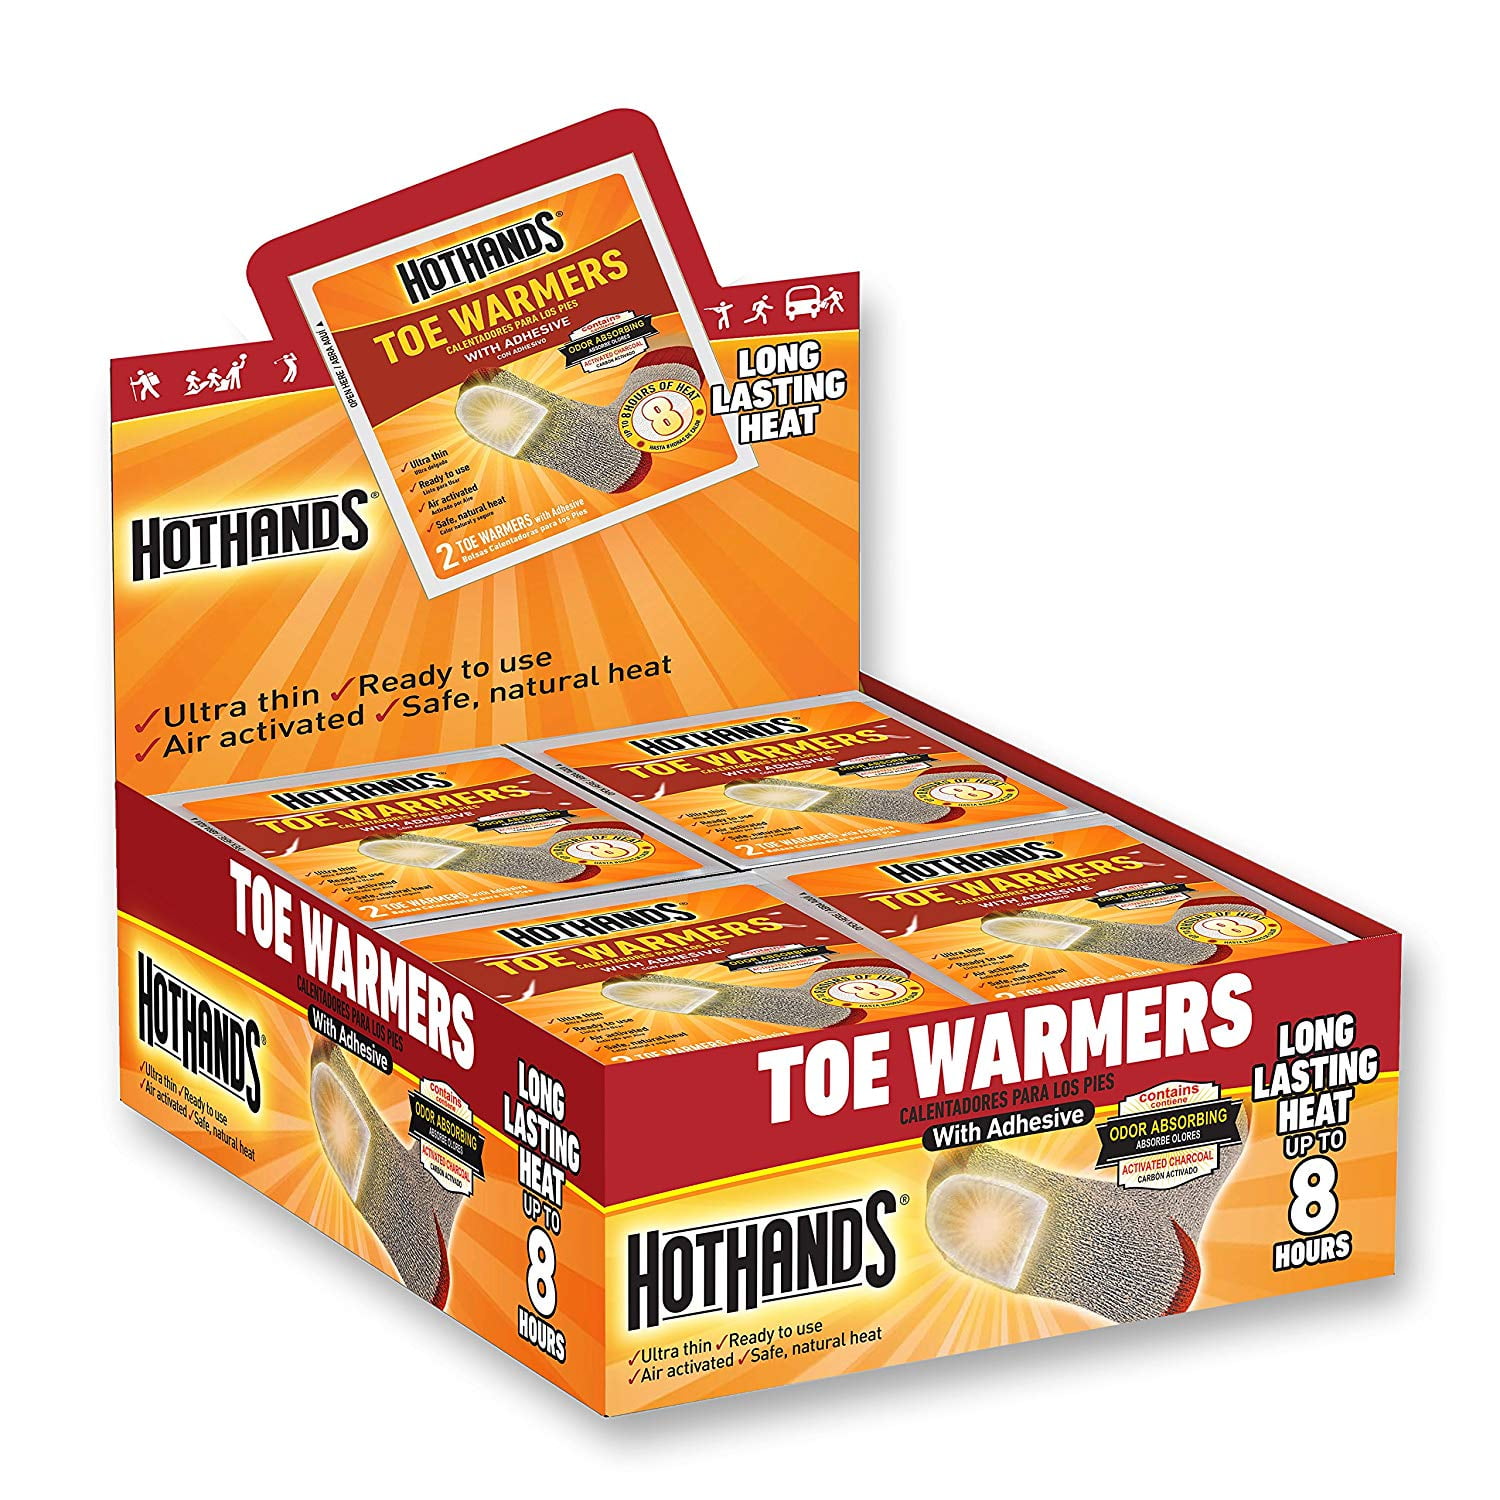 ** 2 X HOTHANDS FOOT WARMERS 2 WARMERS UP TO 8 HOURS READY TO USE WINTER